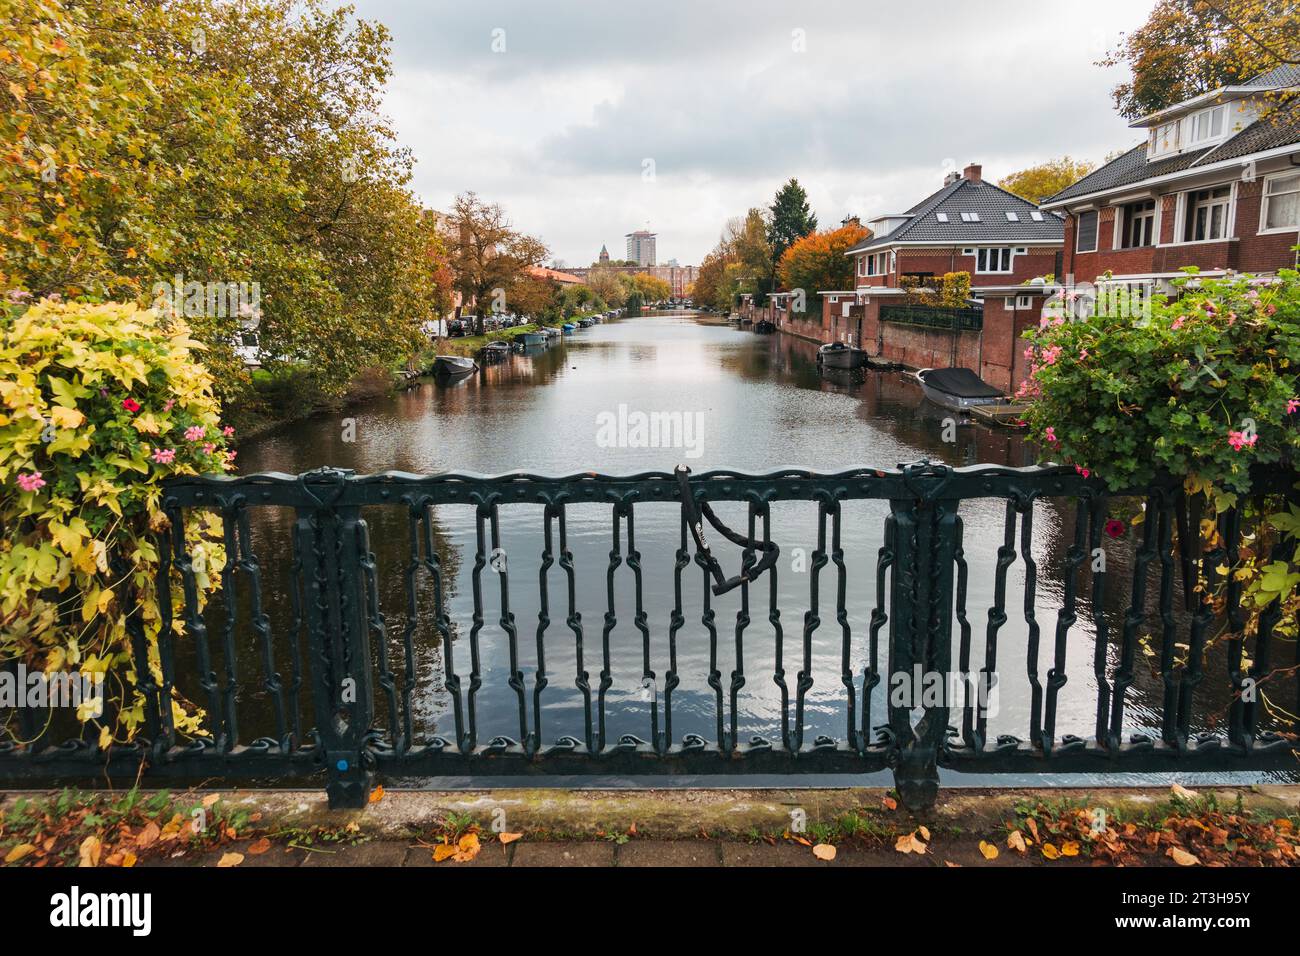 looking down a canal on the Johan M. Coenenstraat bridge in Amsterdam, Netherlands, in autumn Stock Photo